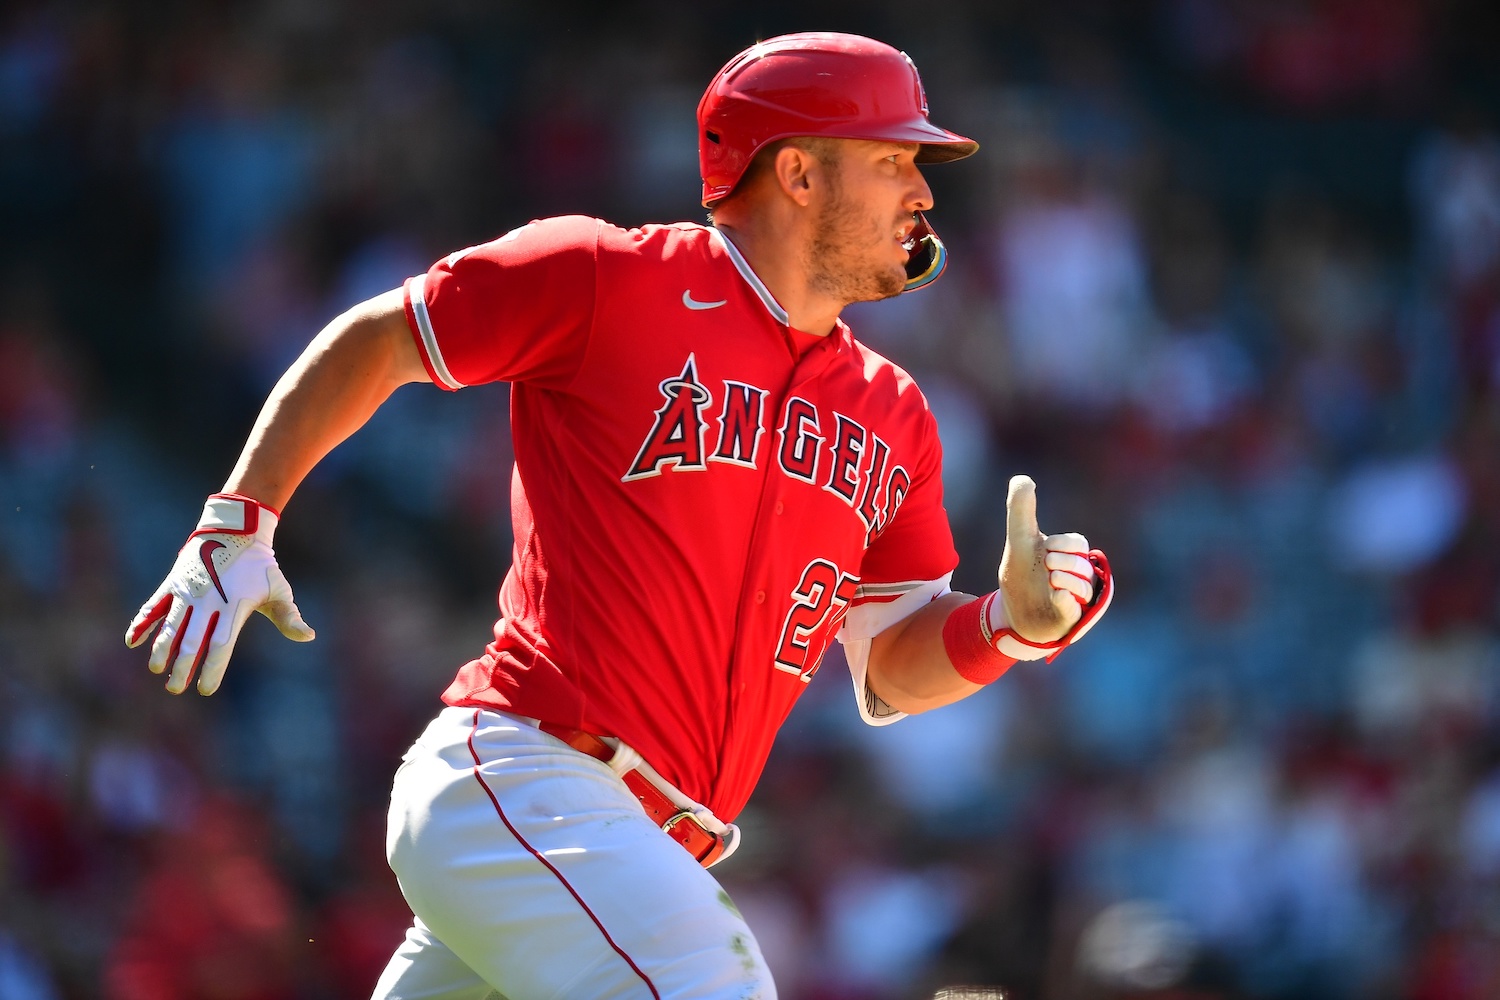 He's nasty': Mike Trout gets real on potentially facing Shohei